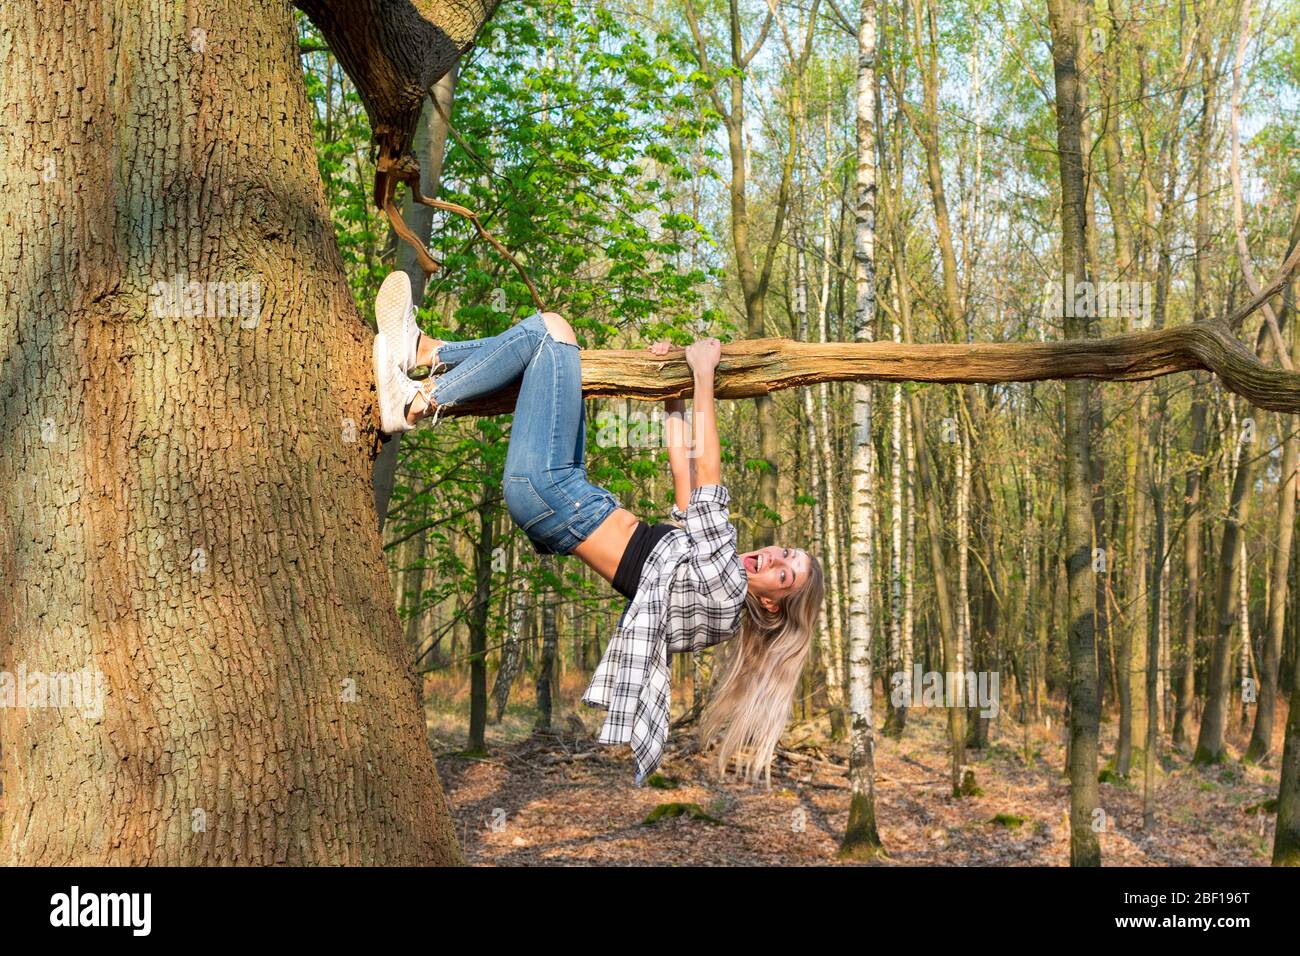 Young woman hangs, laughing out loud, from a thick branch. Location: Germany, North Rhine Westphalia, Hoxfeld Stock Photo